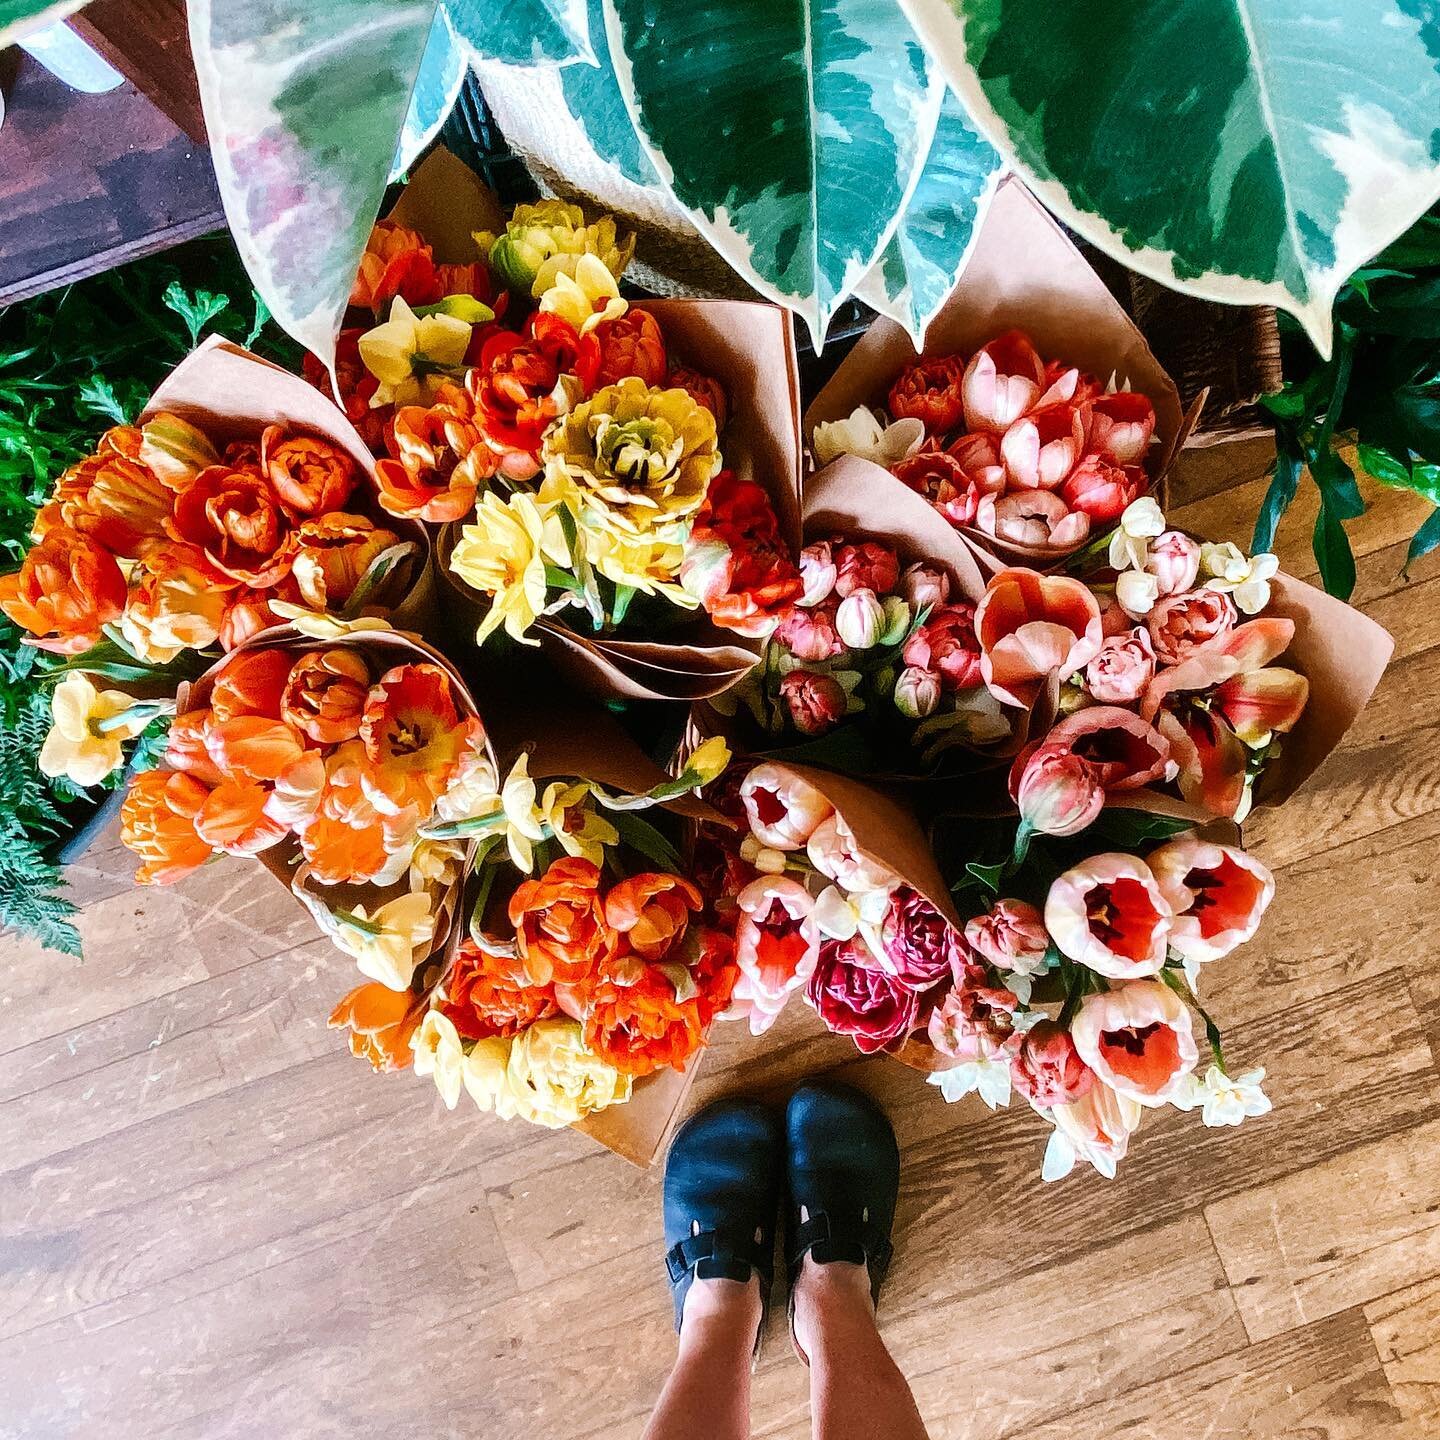 Mother&rsquo;s Day Weekend kickoff! Thank you @lazyacresfarm for putting together these gorgeous mixed bouquets. I have a bucket of brights and a bucket of lights for the weekend (or until sell out!) $25.00 each. A treat for you or yours!
.
.
.
.
.
.